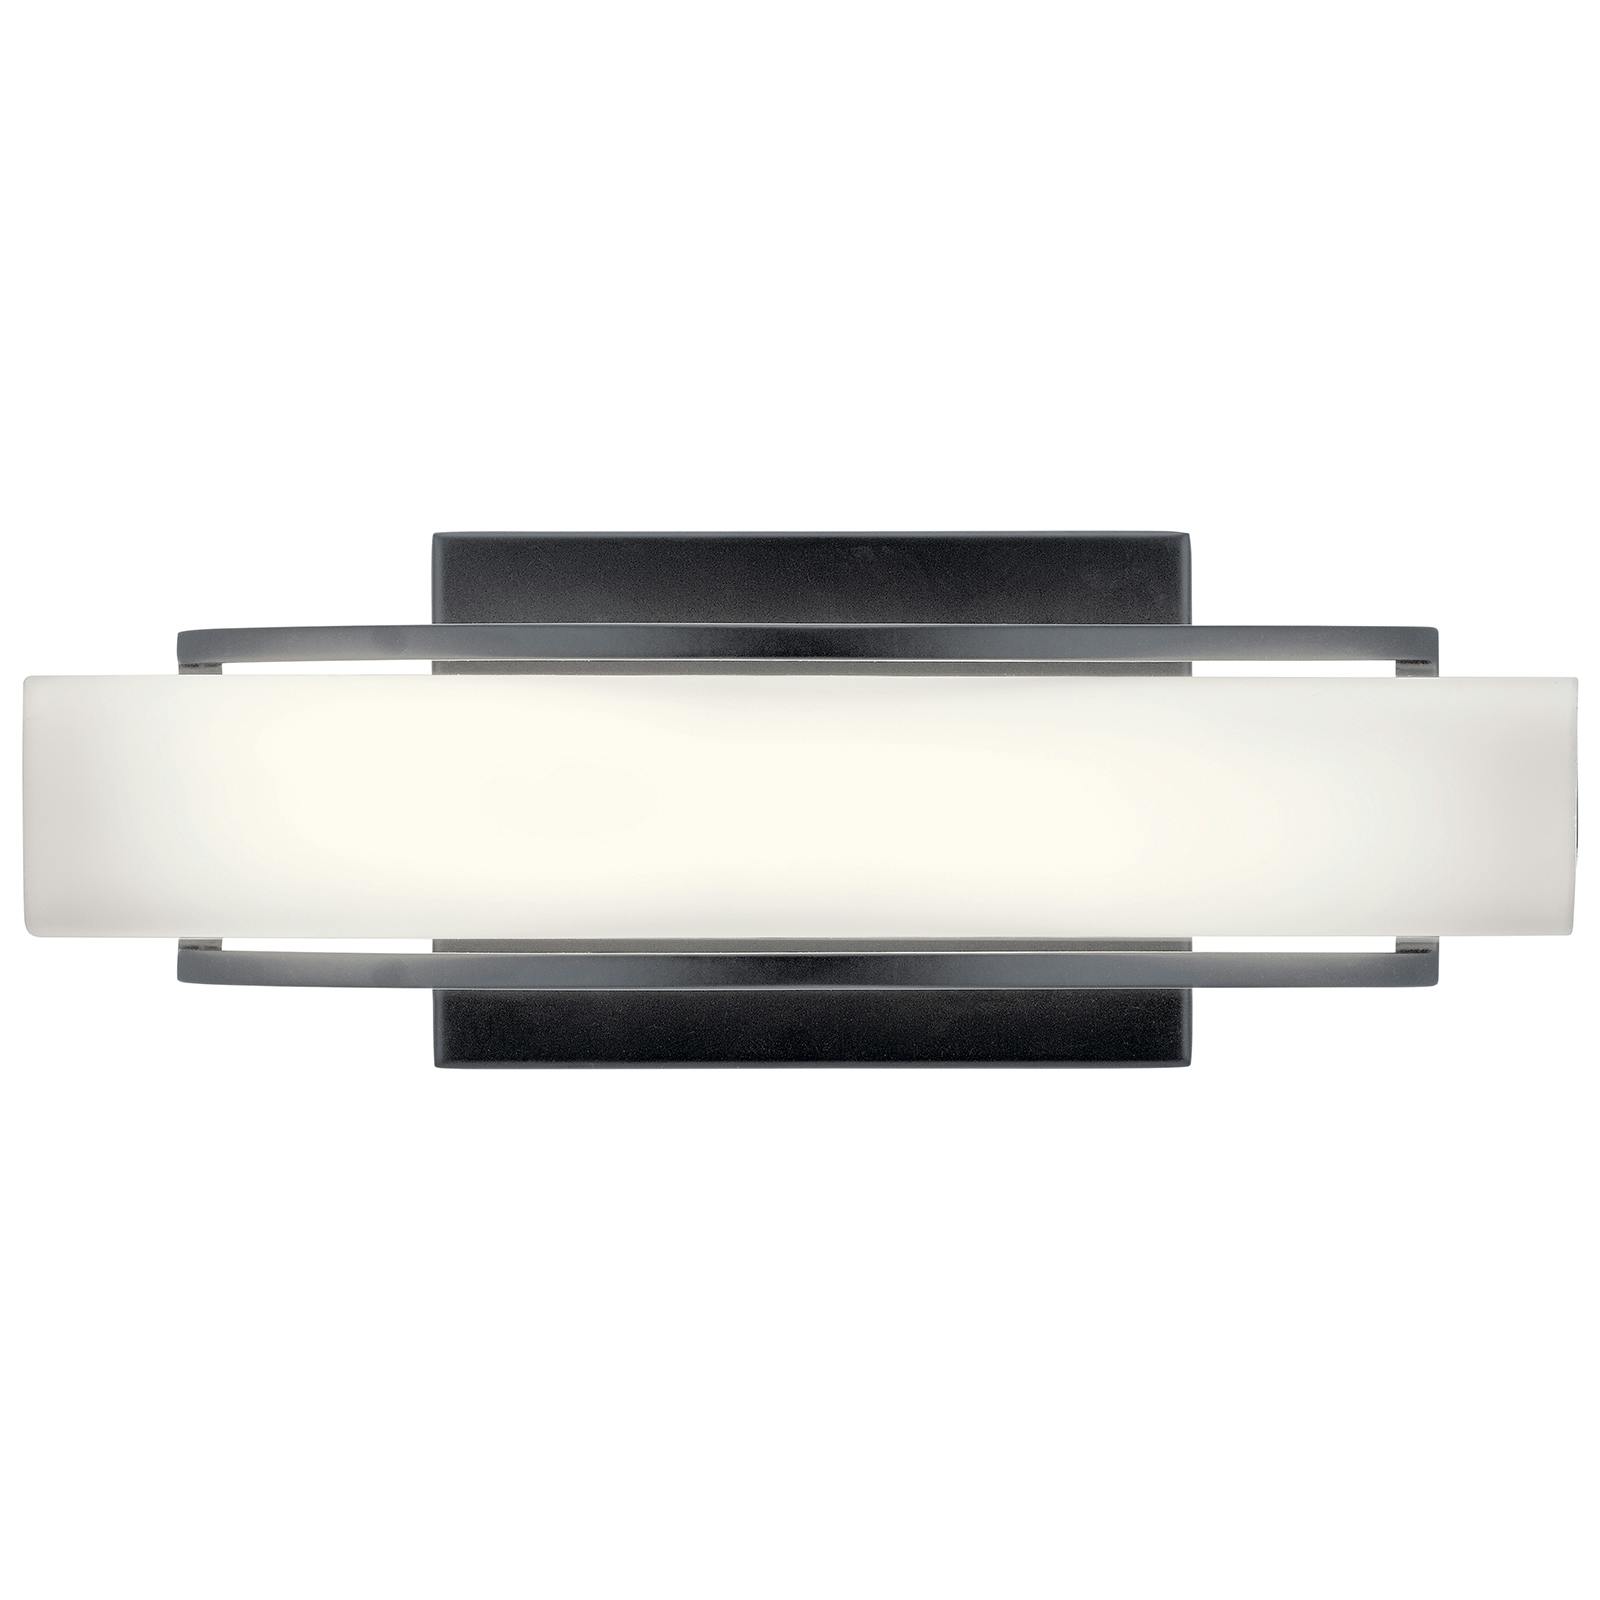 Front view of the Rowan 13.25" LED Vanity Light Black on a white background